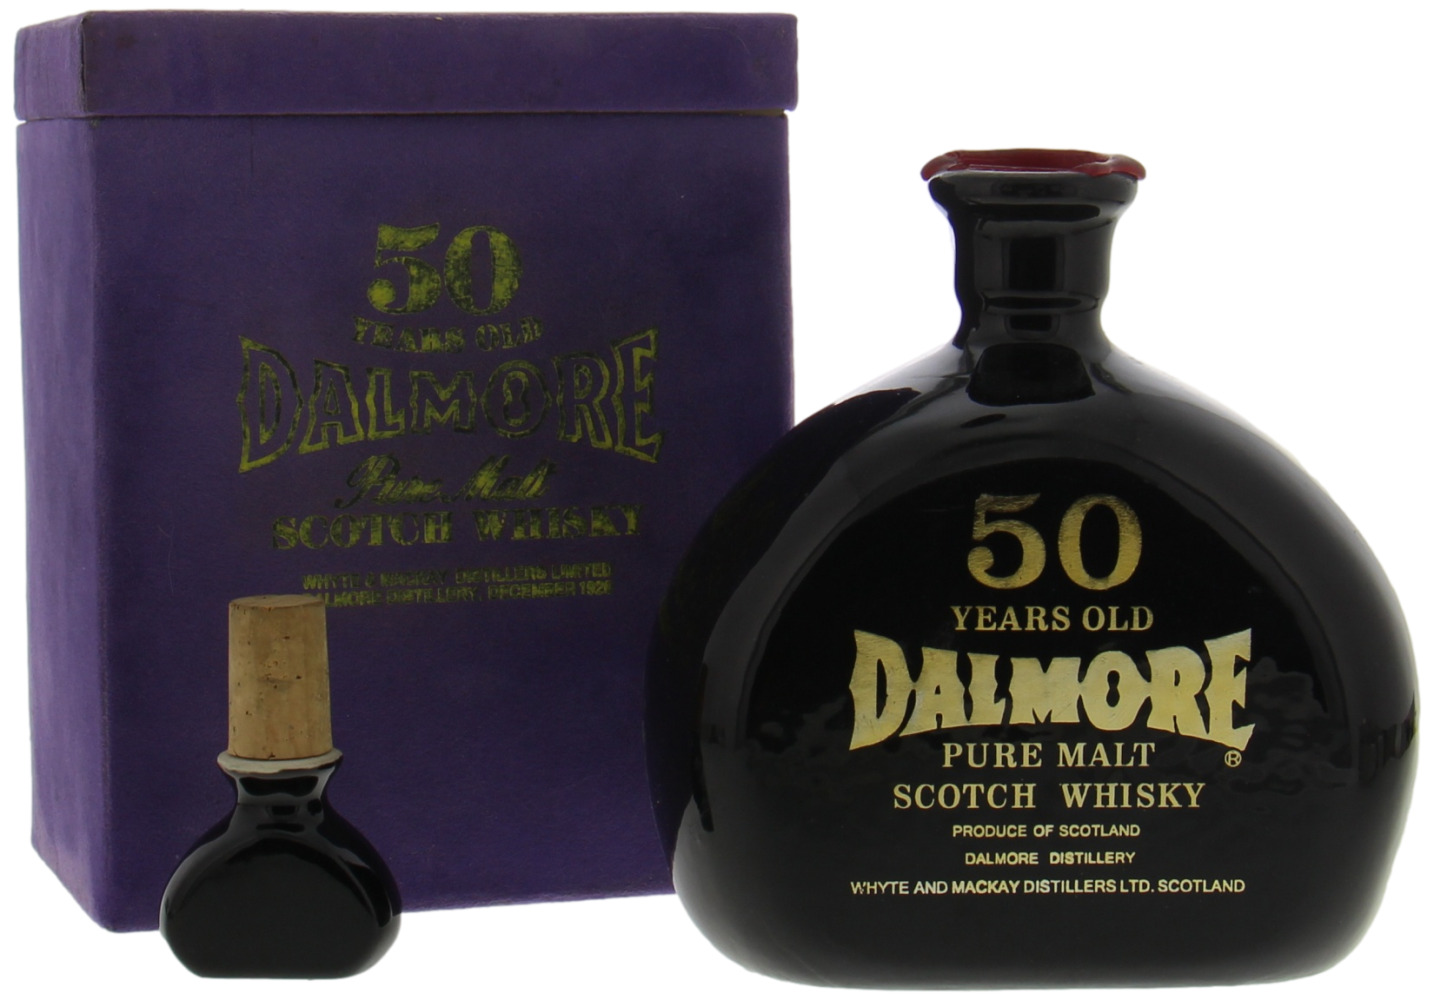 Dalmore - 50 Years Old Black Decanter Whyte & Mackay 1926